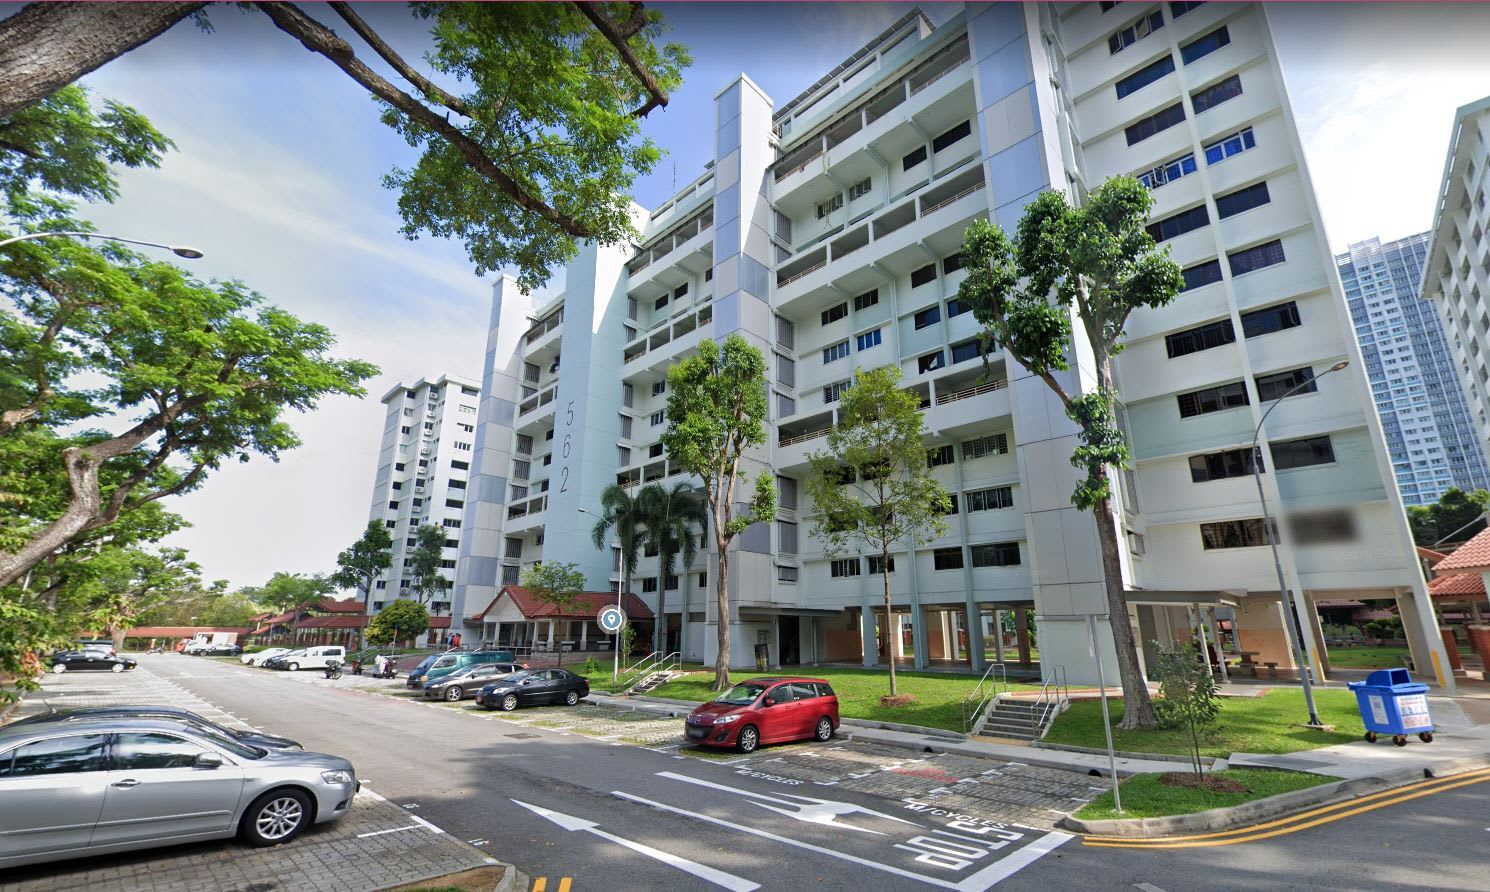 4 HDB blocks at Ang Mo Kio Ave 3 selected for Sers; first such en bloc since 2018